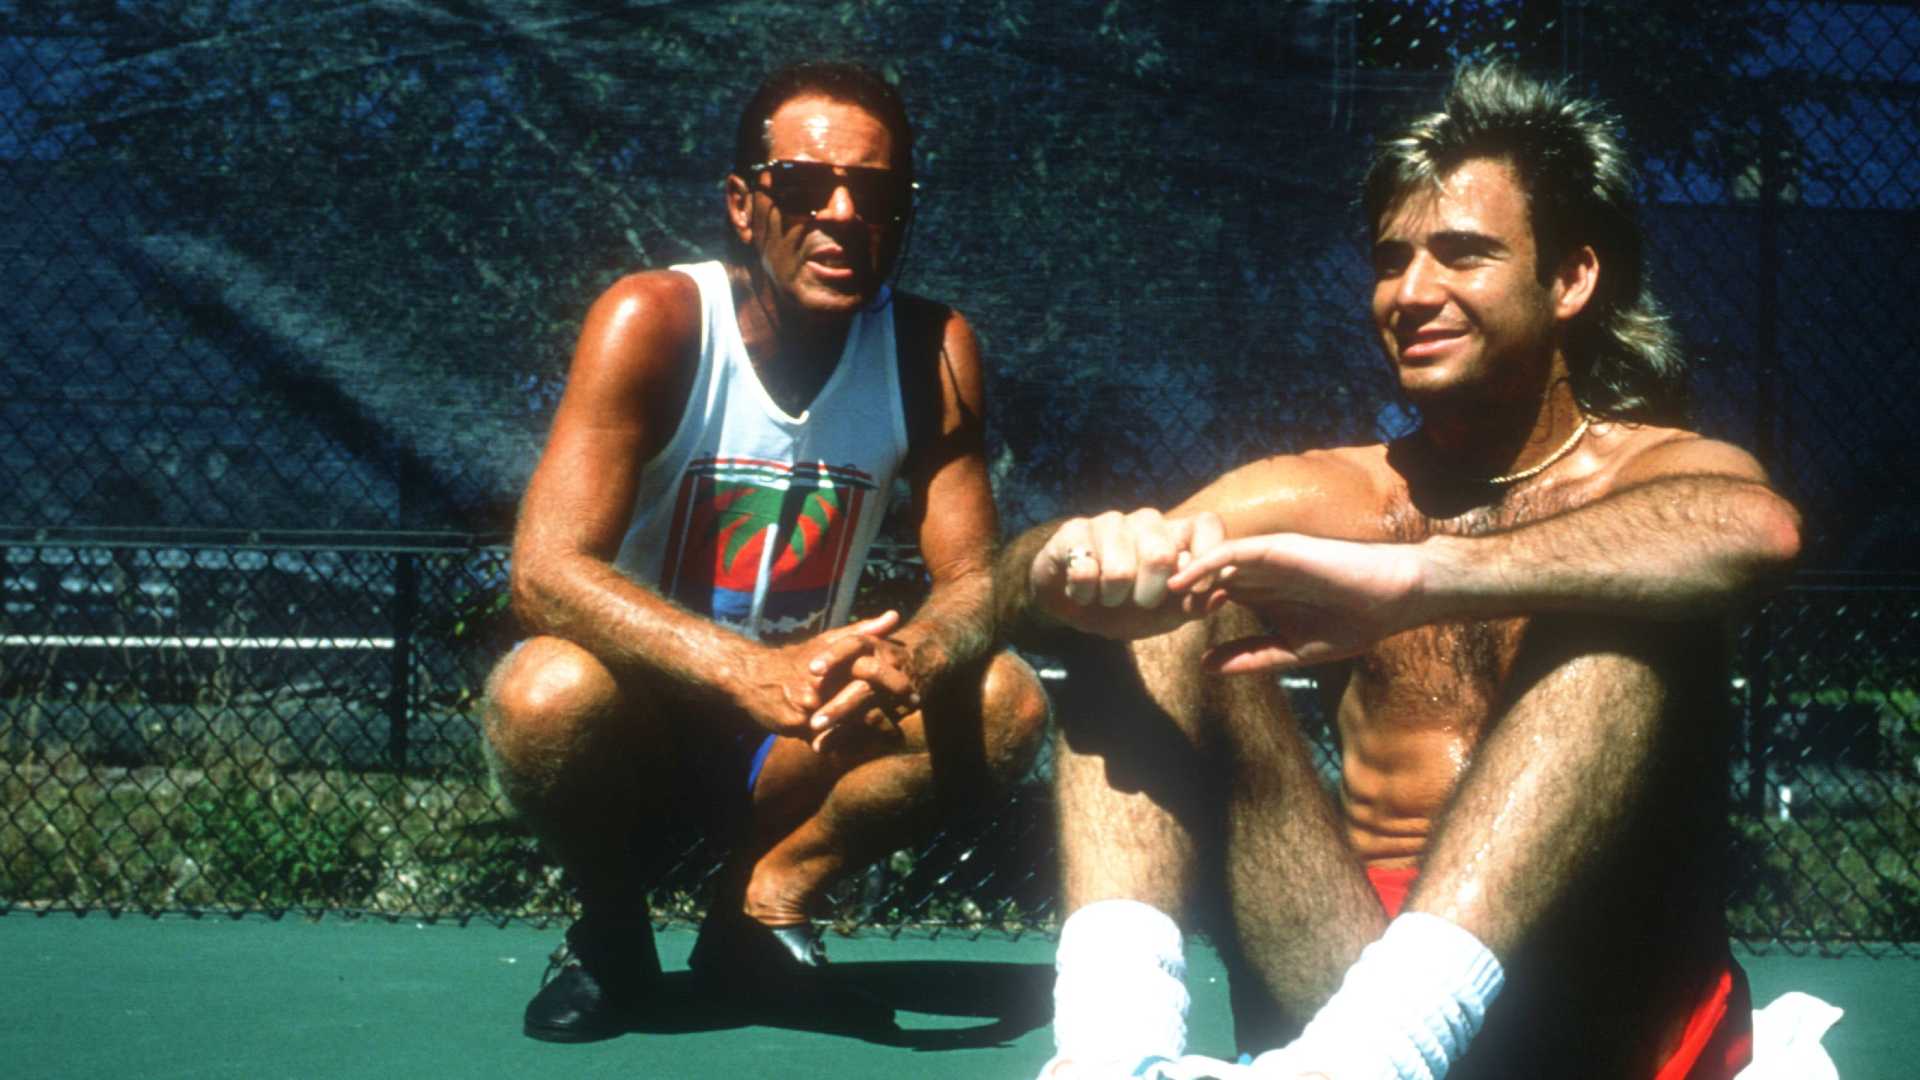 How ‘Outsider’ Nick Bollettieri Changed The Game | Sports Opinion